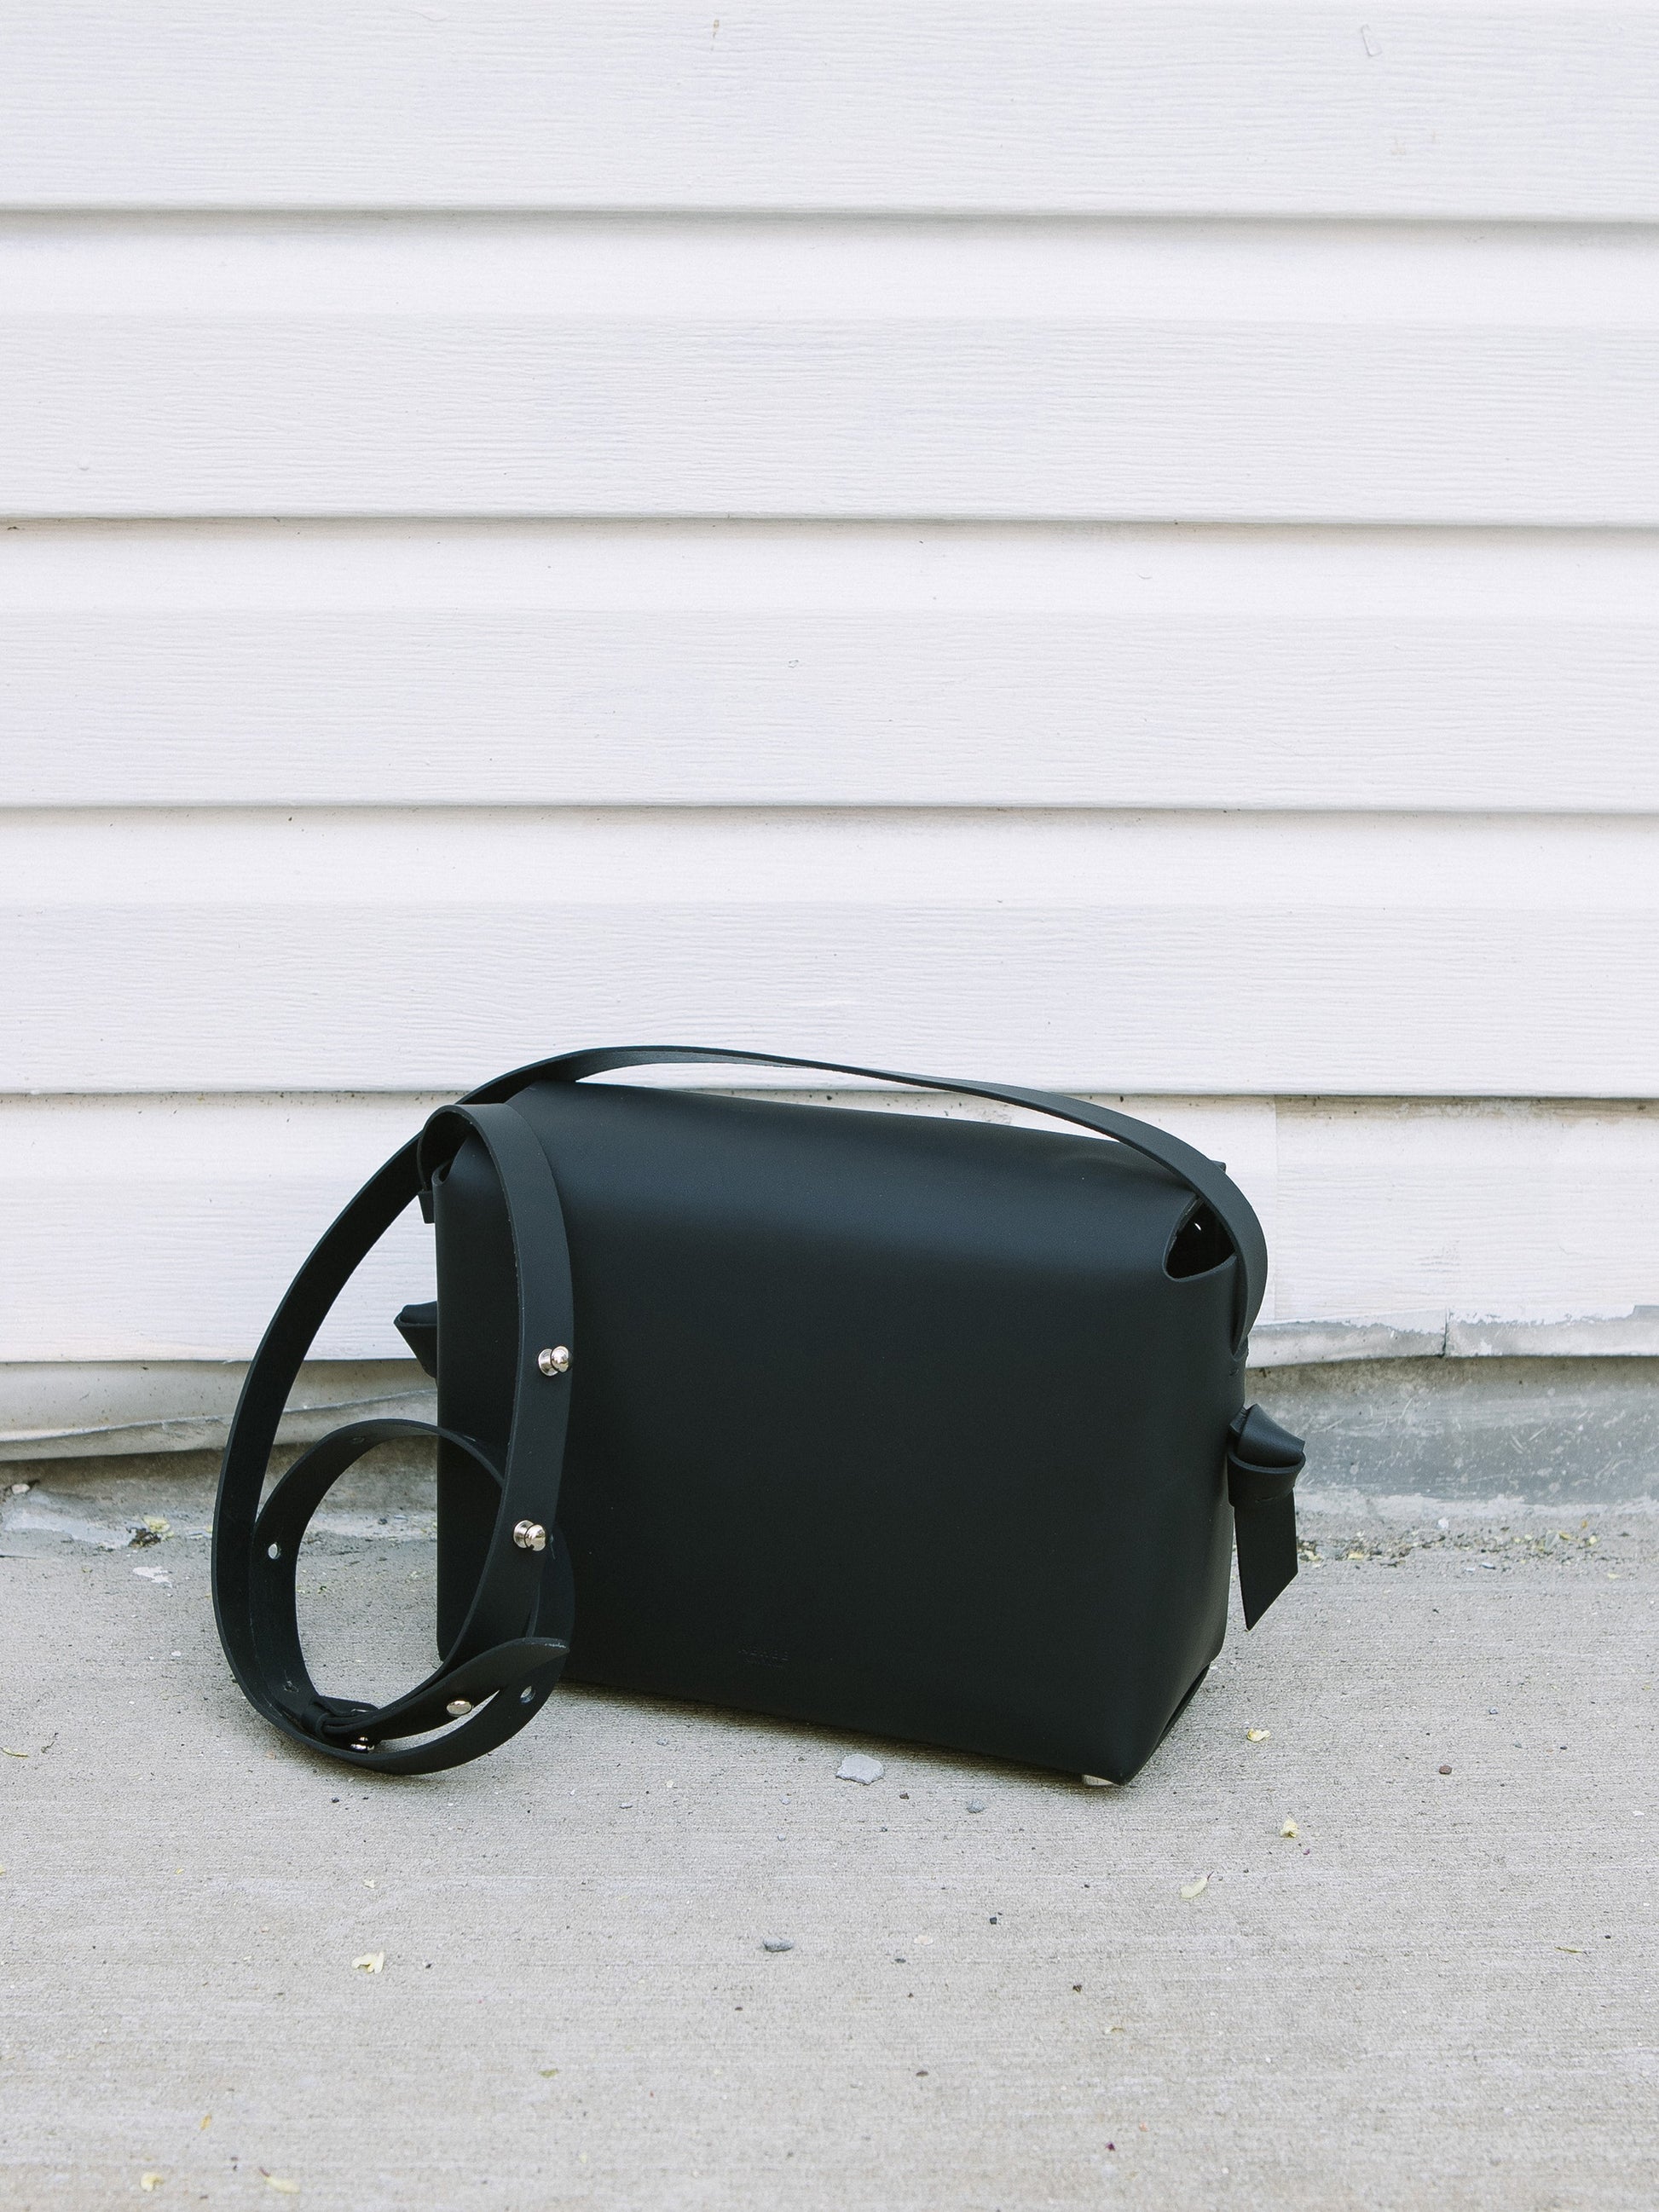 Chic black crossbody bag and shoulder bag with adjustable strap crafted from Italian vegetable tanned leather for a minimal yet sophisticated look.